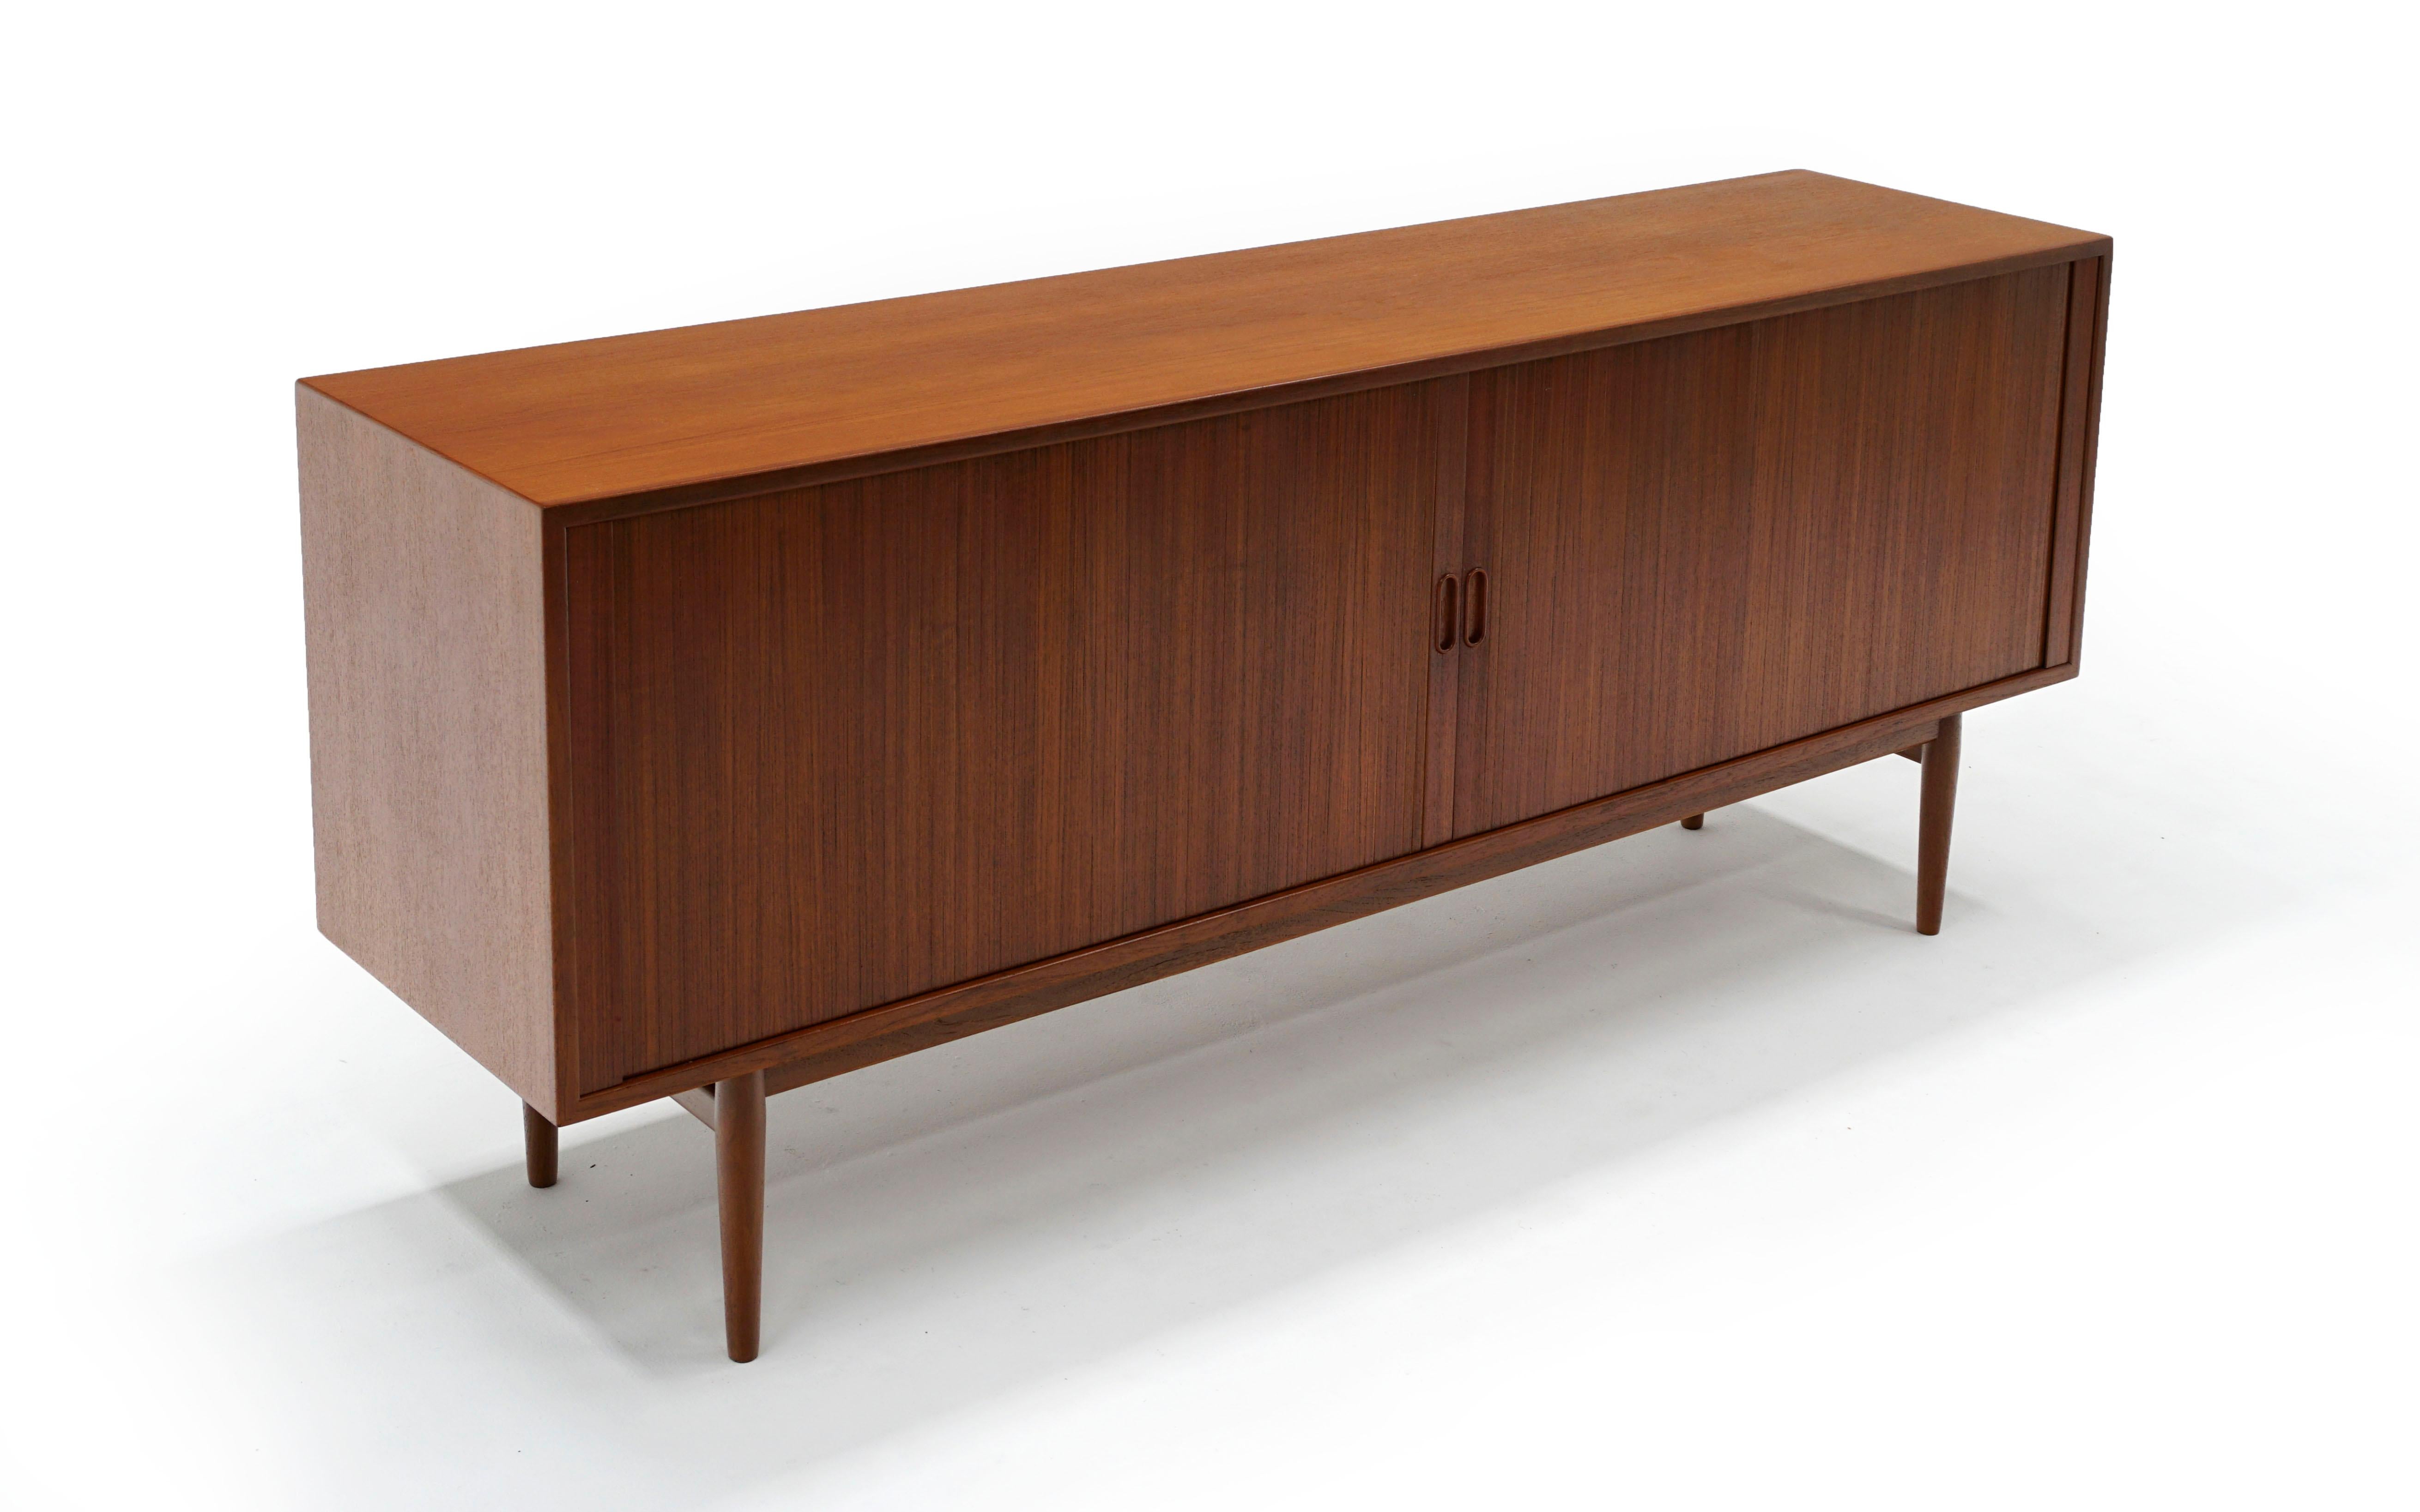 Brazilian rosewood Danish modern sideboard / credenza / media cabinet designed by Arne Vodder for Sibast. Expertly restored and refinished, ready to use. The doors slide open and disappear into the cabinet. The craftsmanship is such that it almost